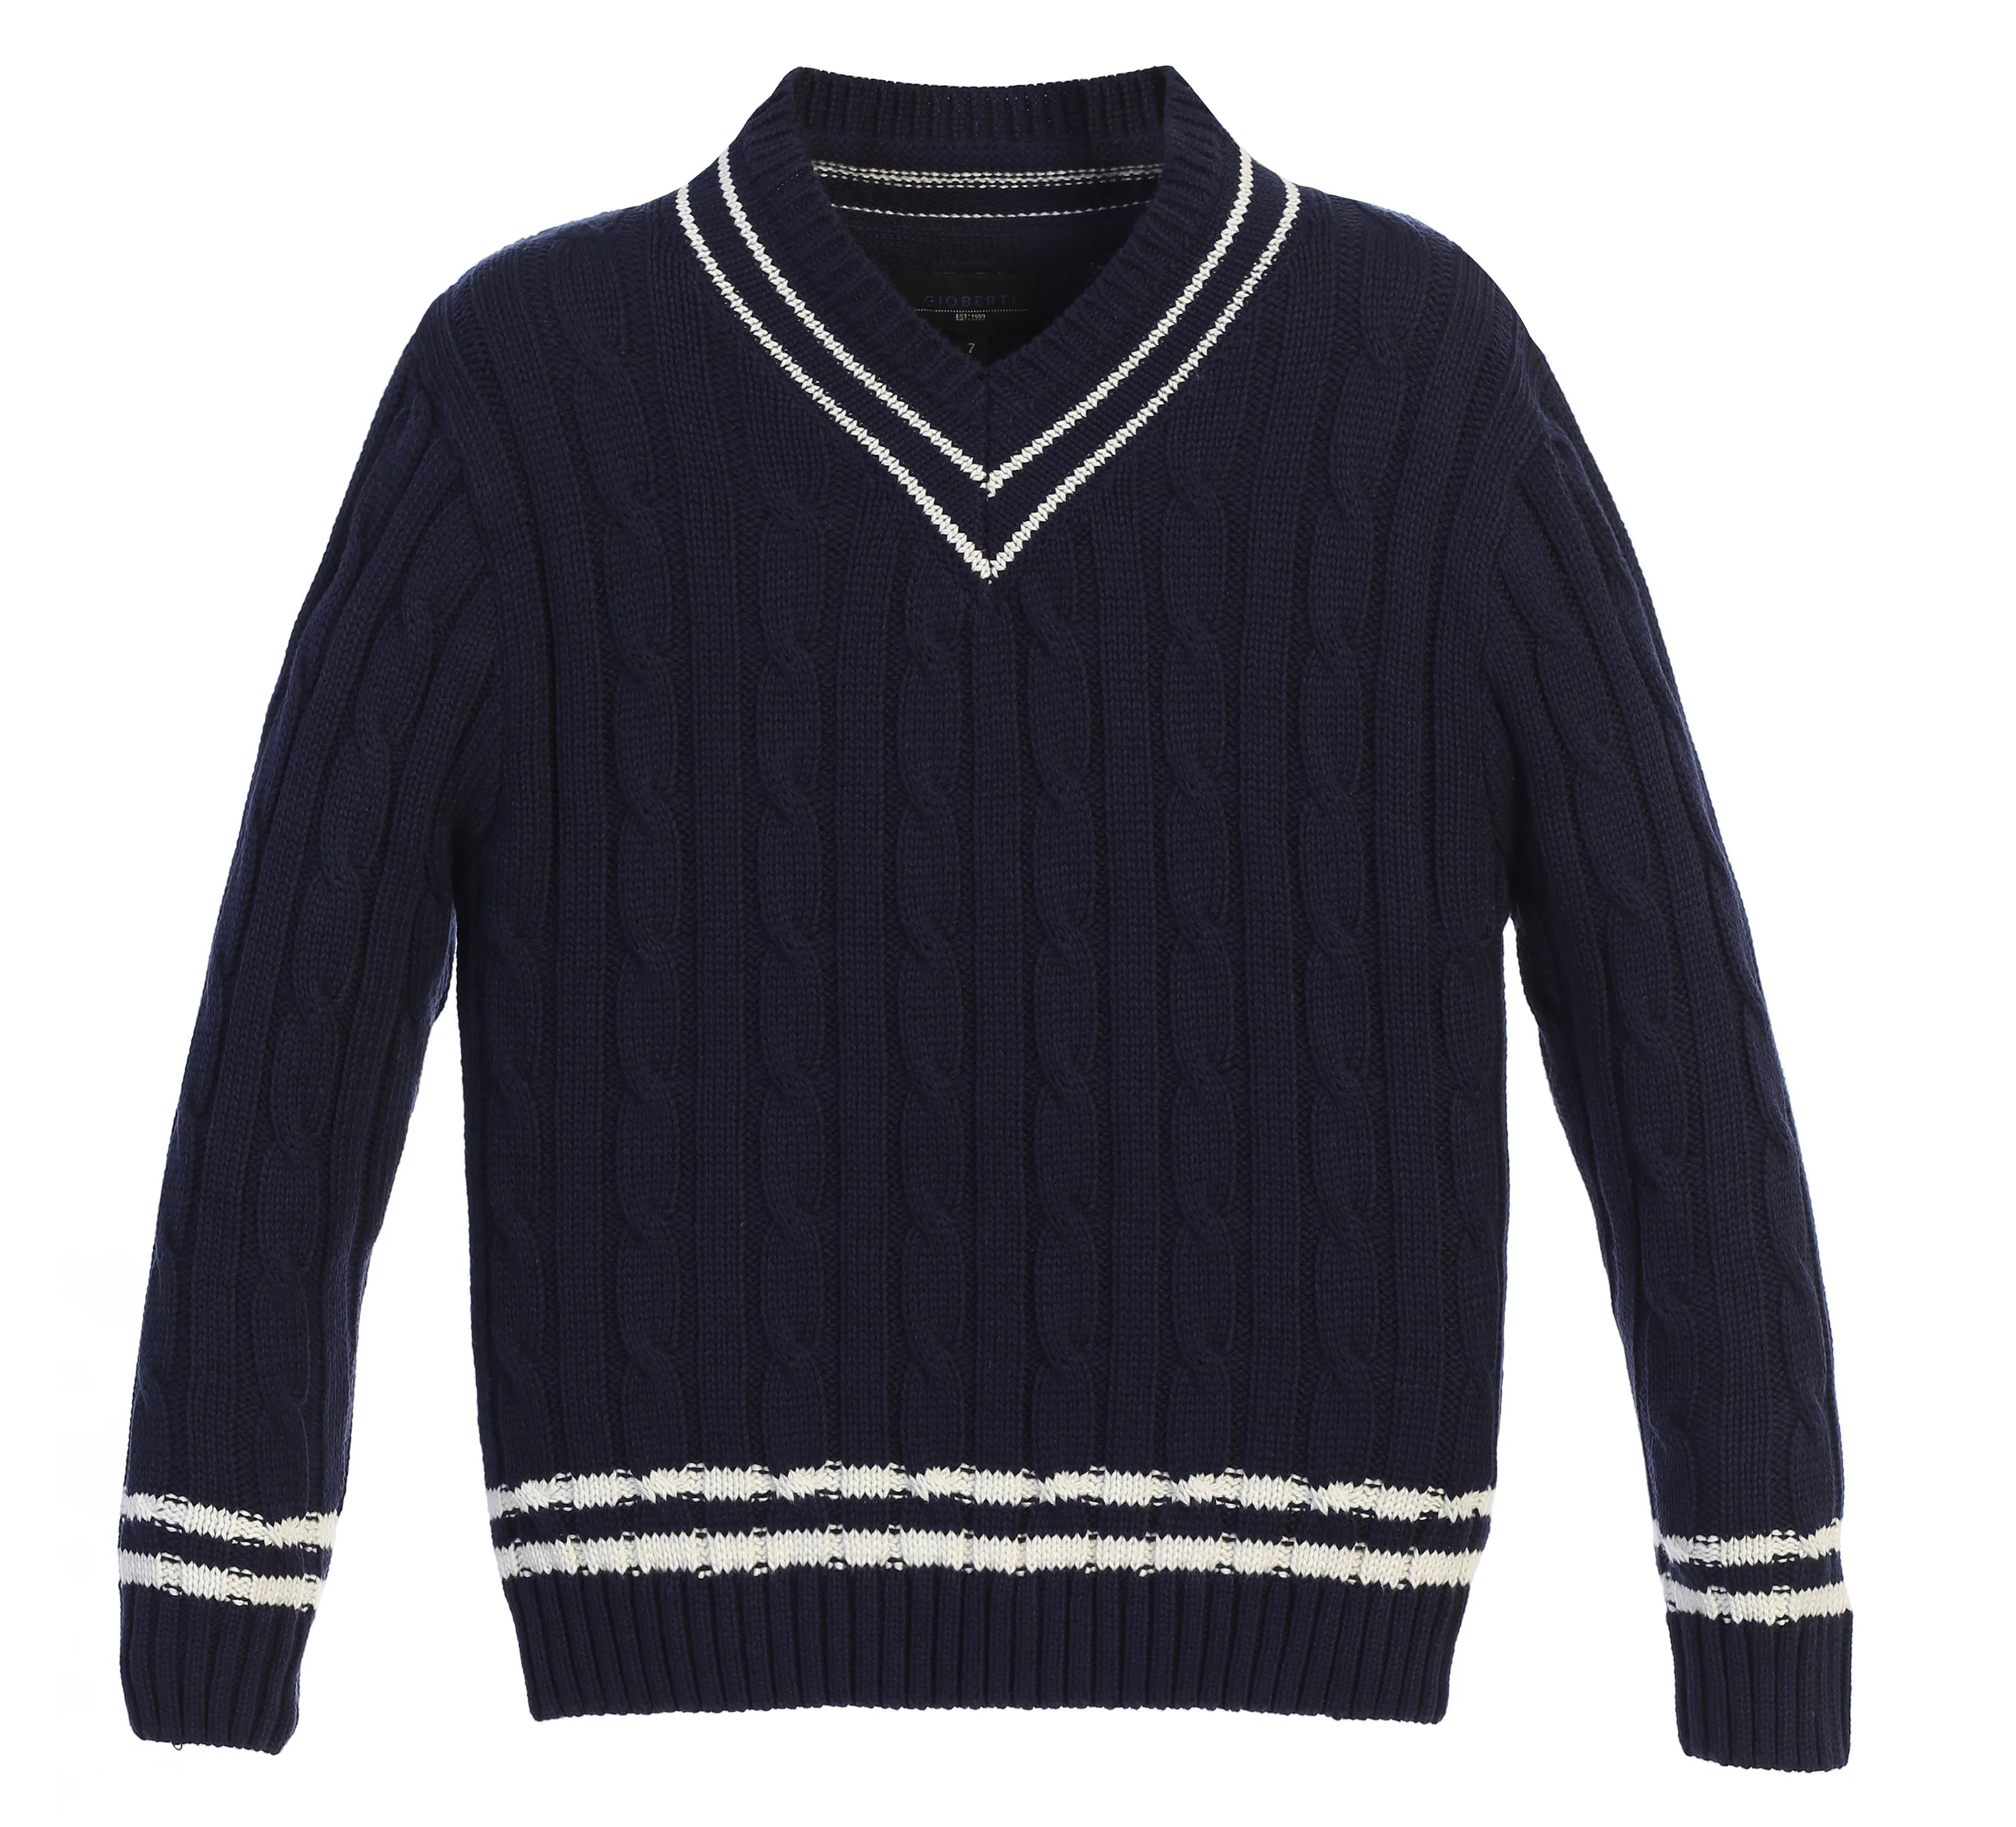 Gioberti Kids and Boys 100% Cotton V-Neck Cable Knit Sweater | Walmart (US)